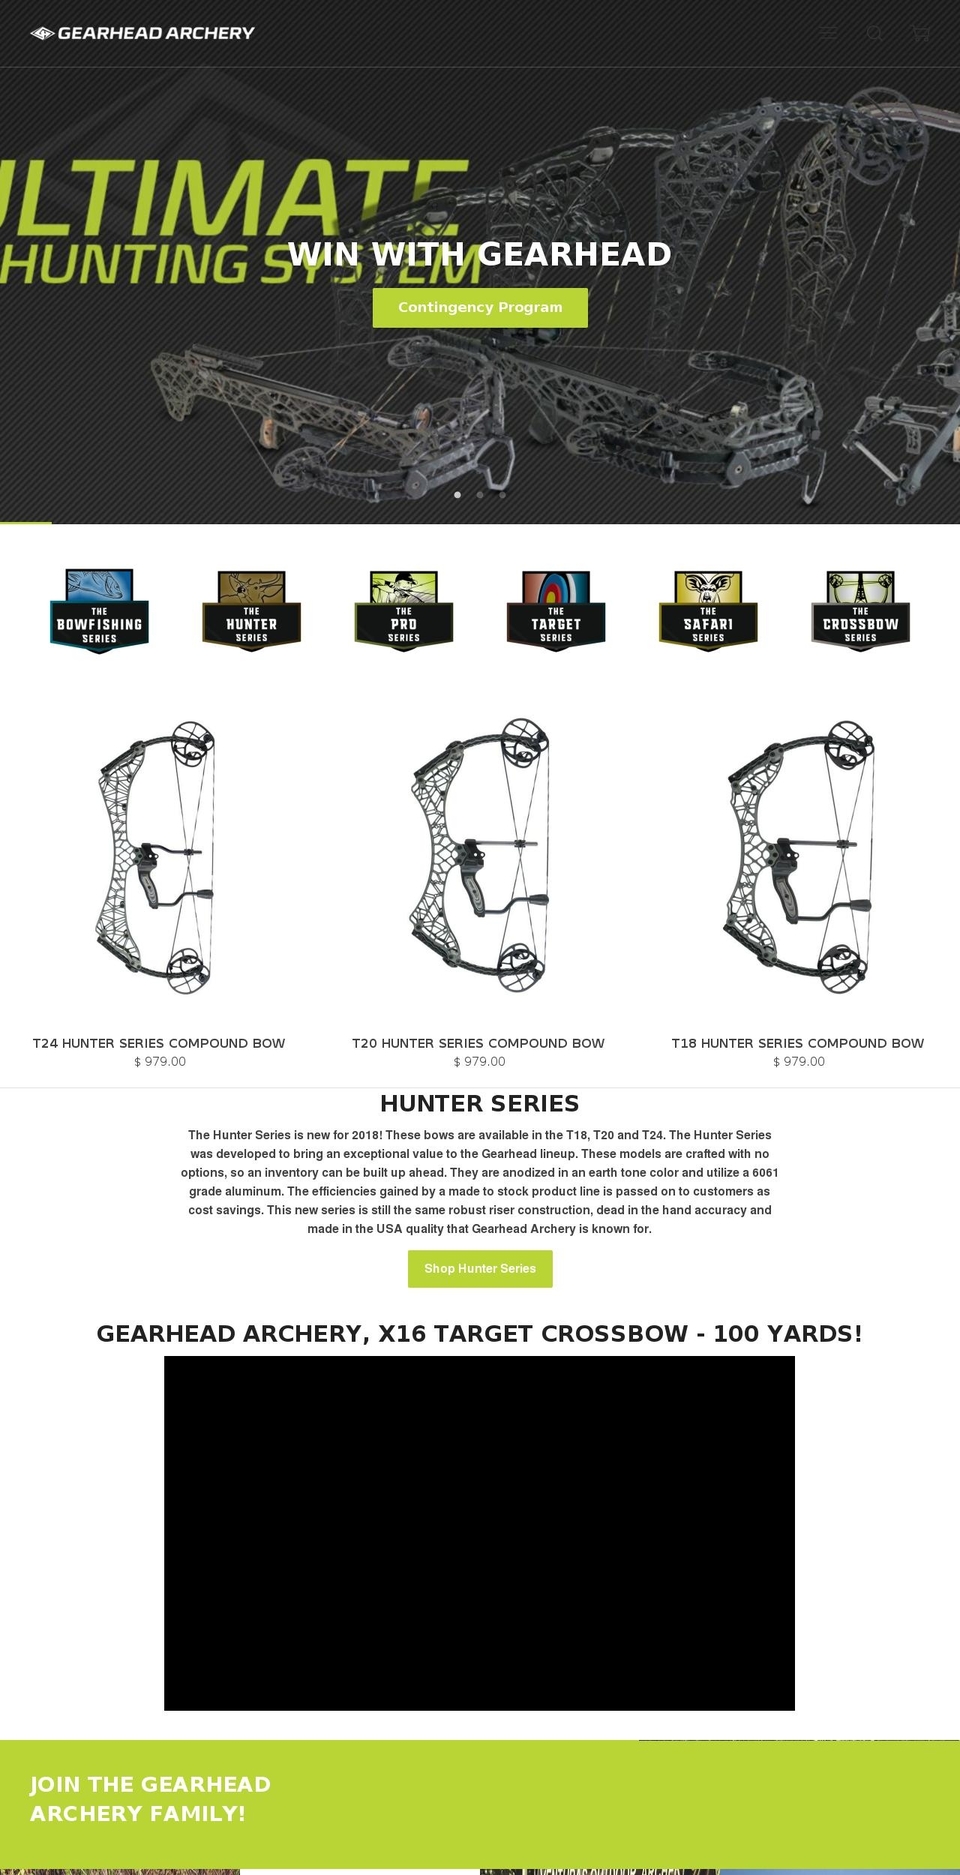 gearhead-2018 Shopify theme site example ptarchery.us